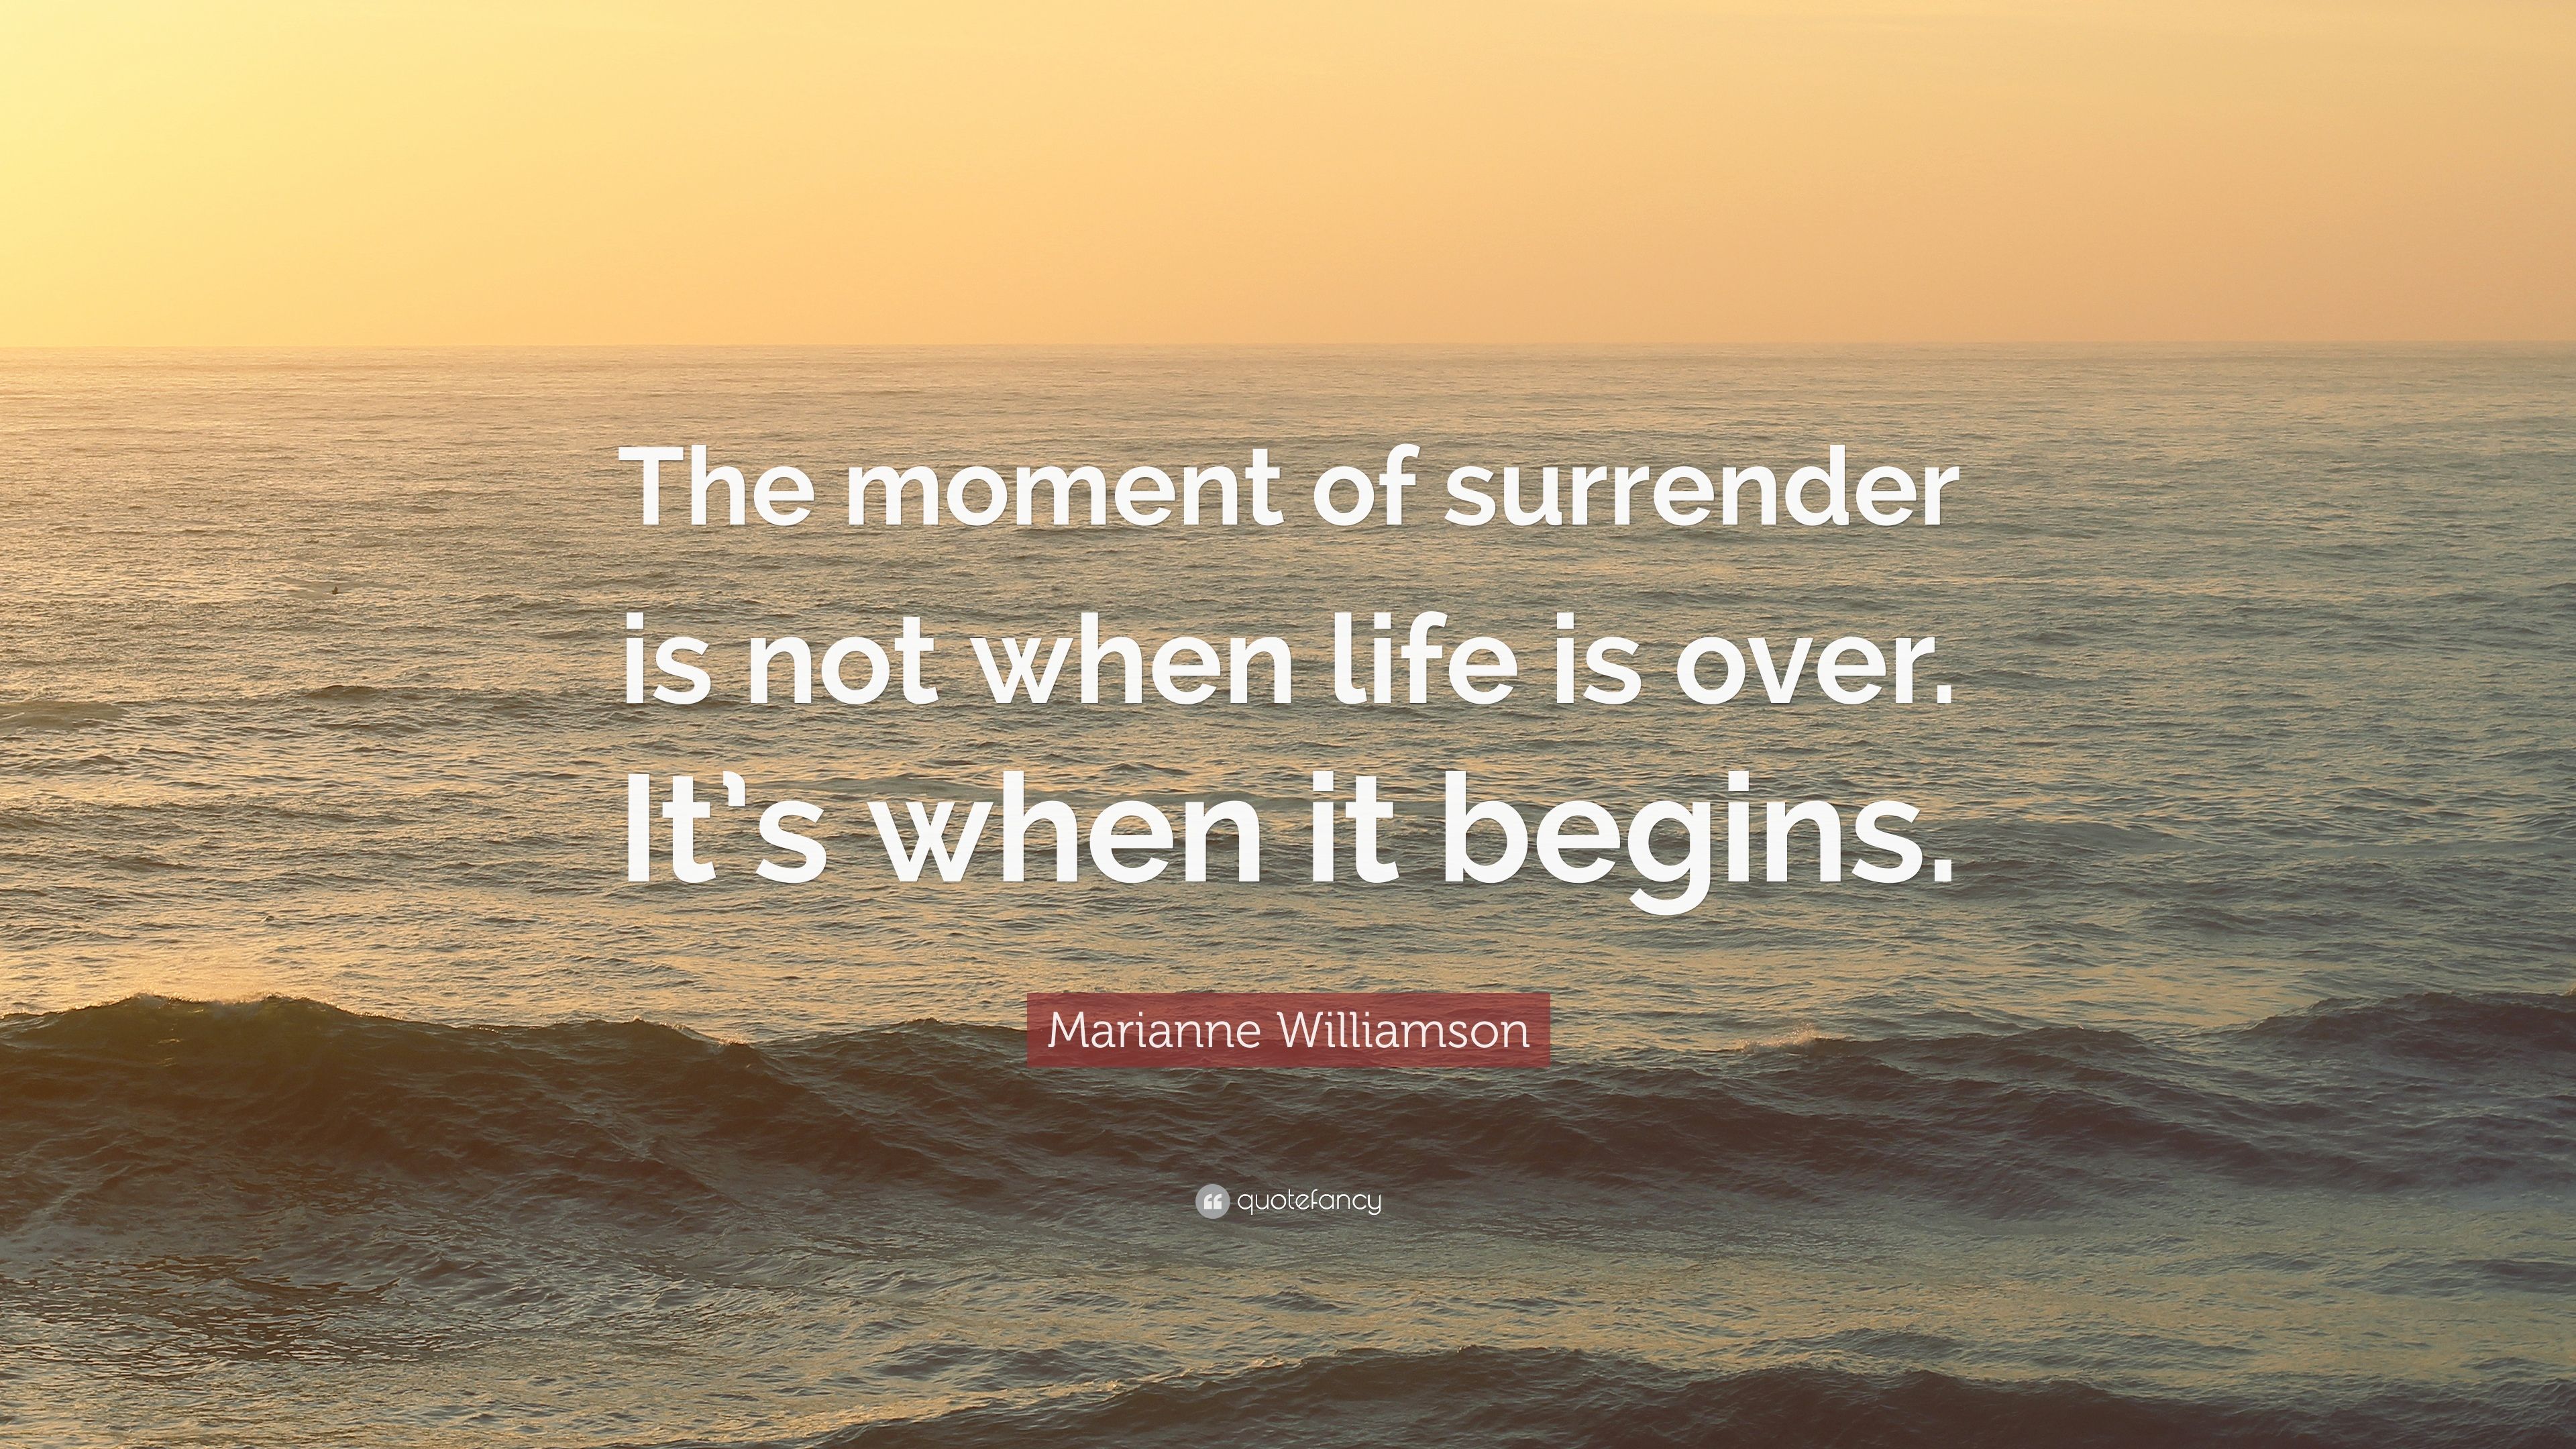 Marianne Williamson Quote: “The moment of surrender is not when life is over. It's when it begins.” (19 wallpaper)